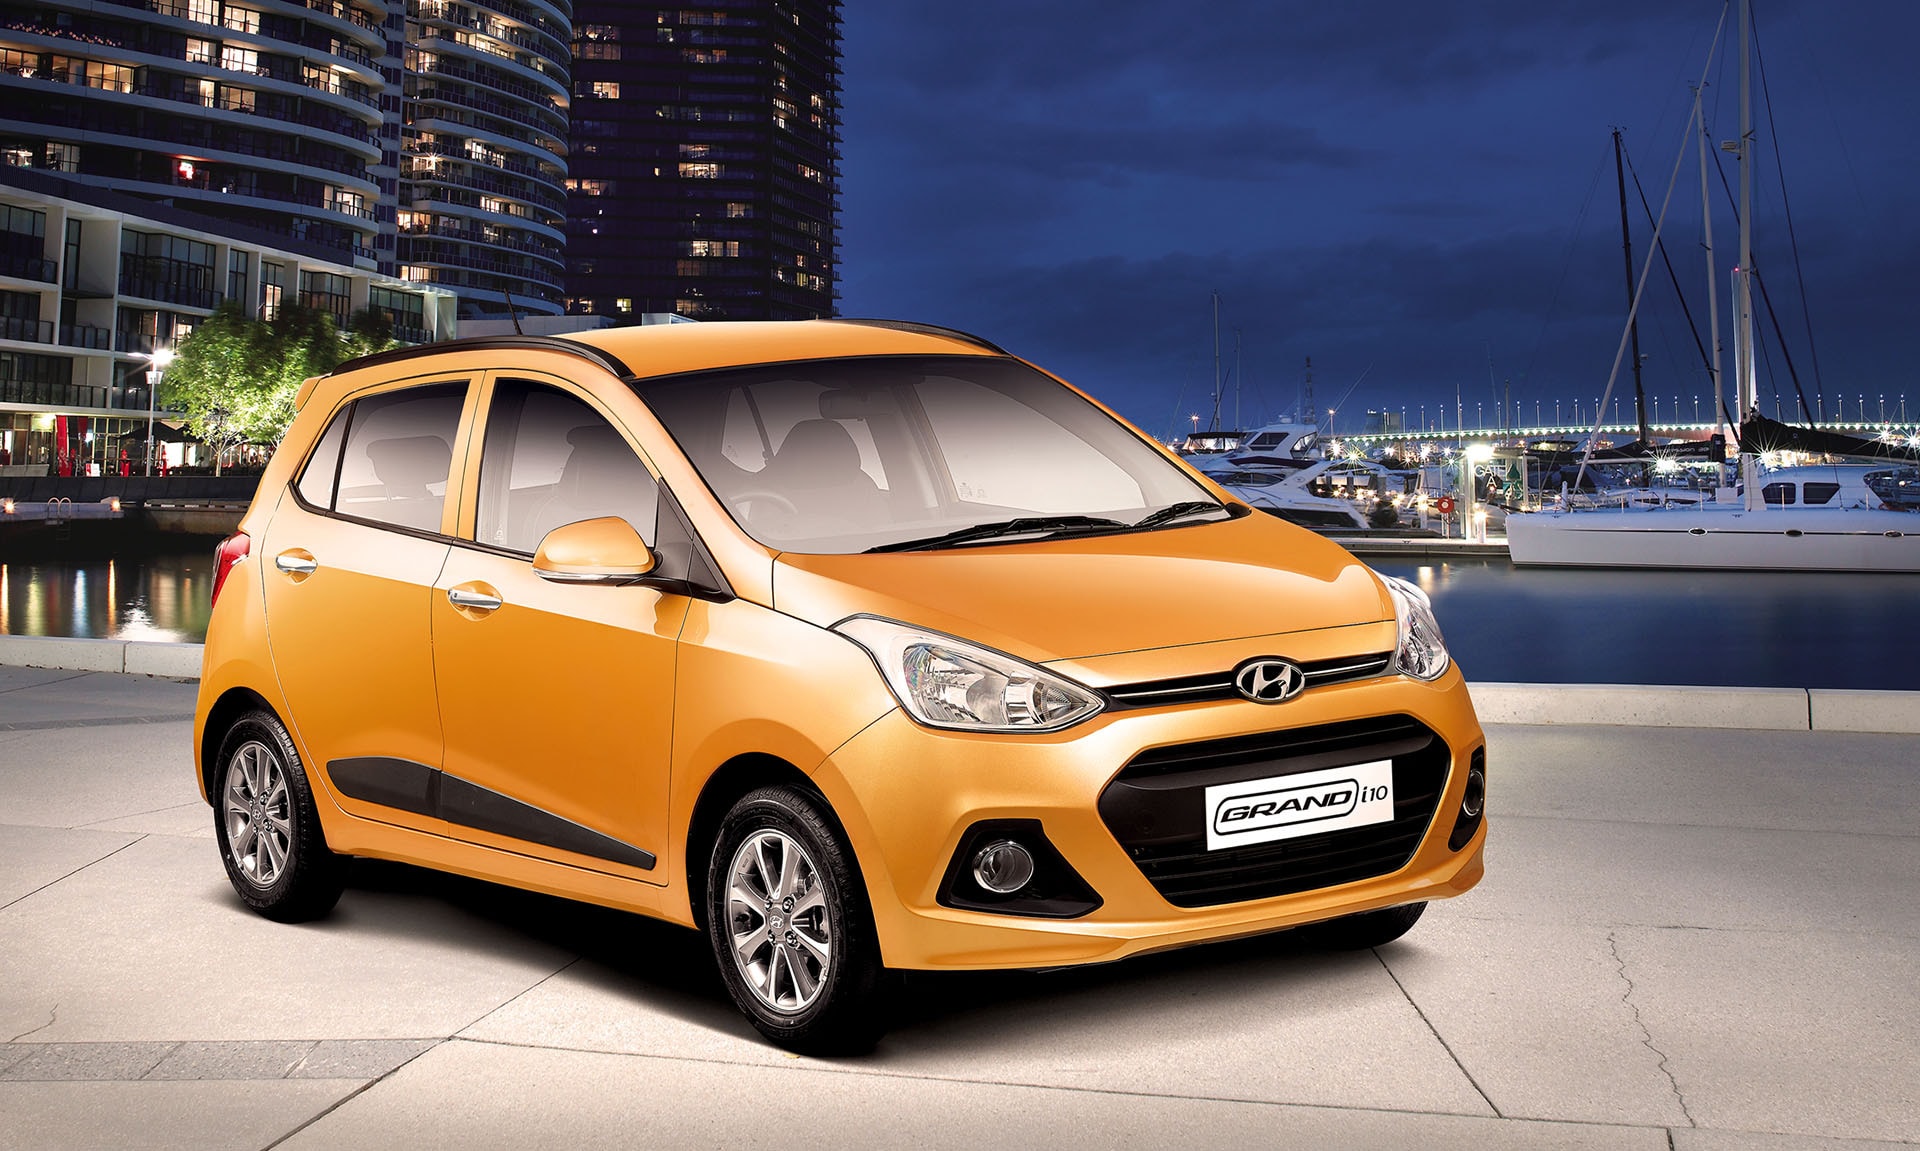 Hyundai Reports Strong i10 Demand in India, Adds Petrol